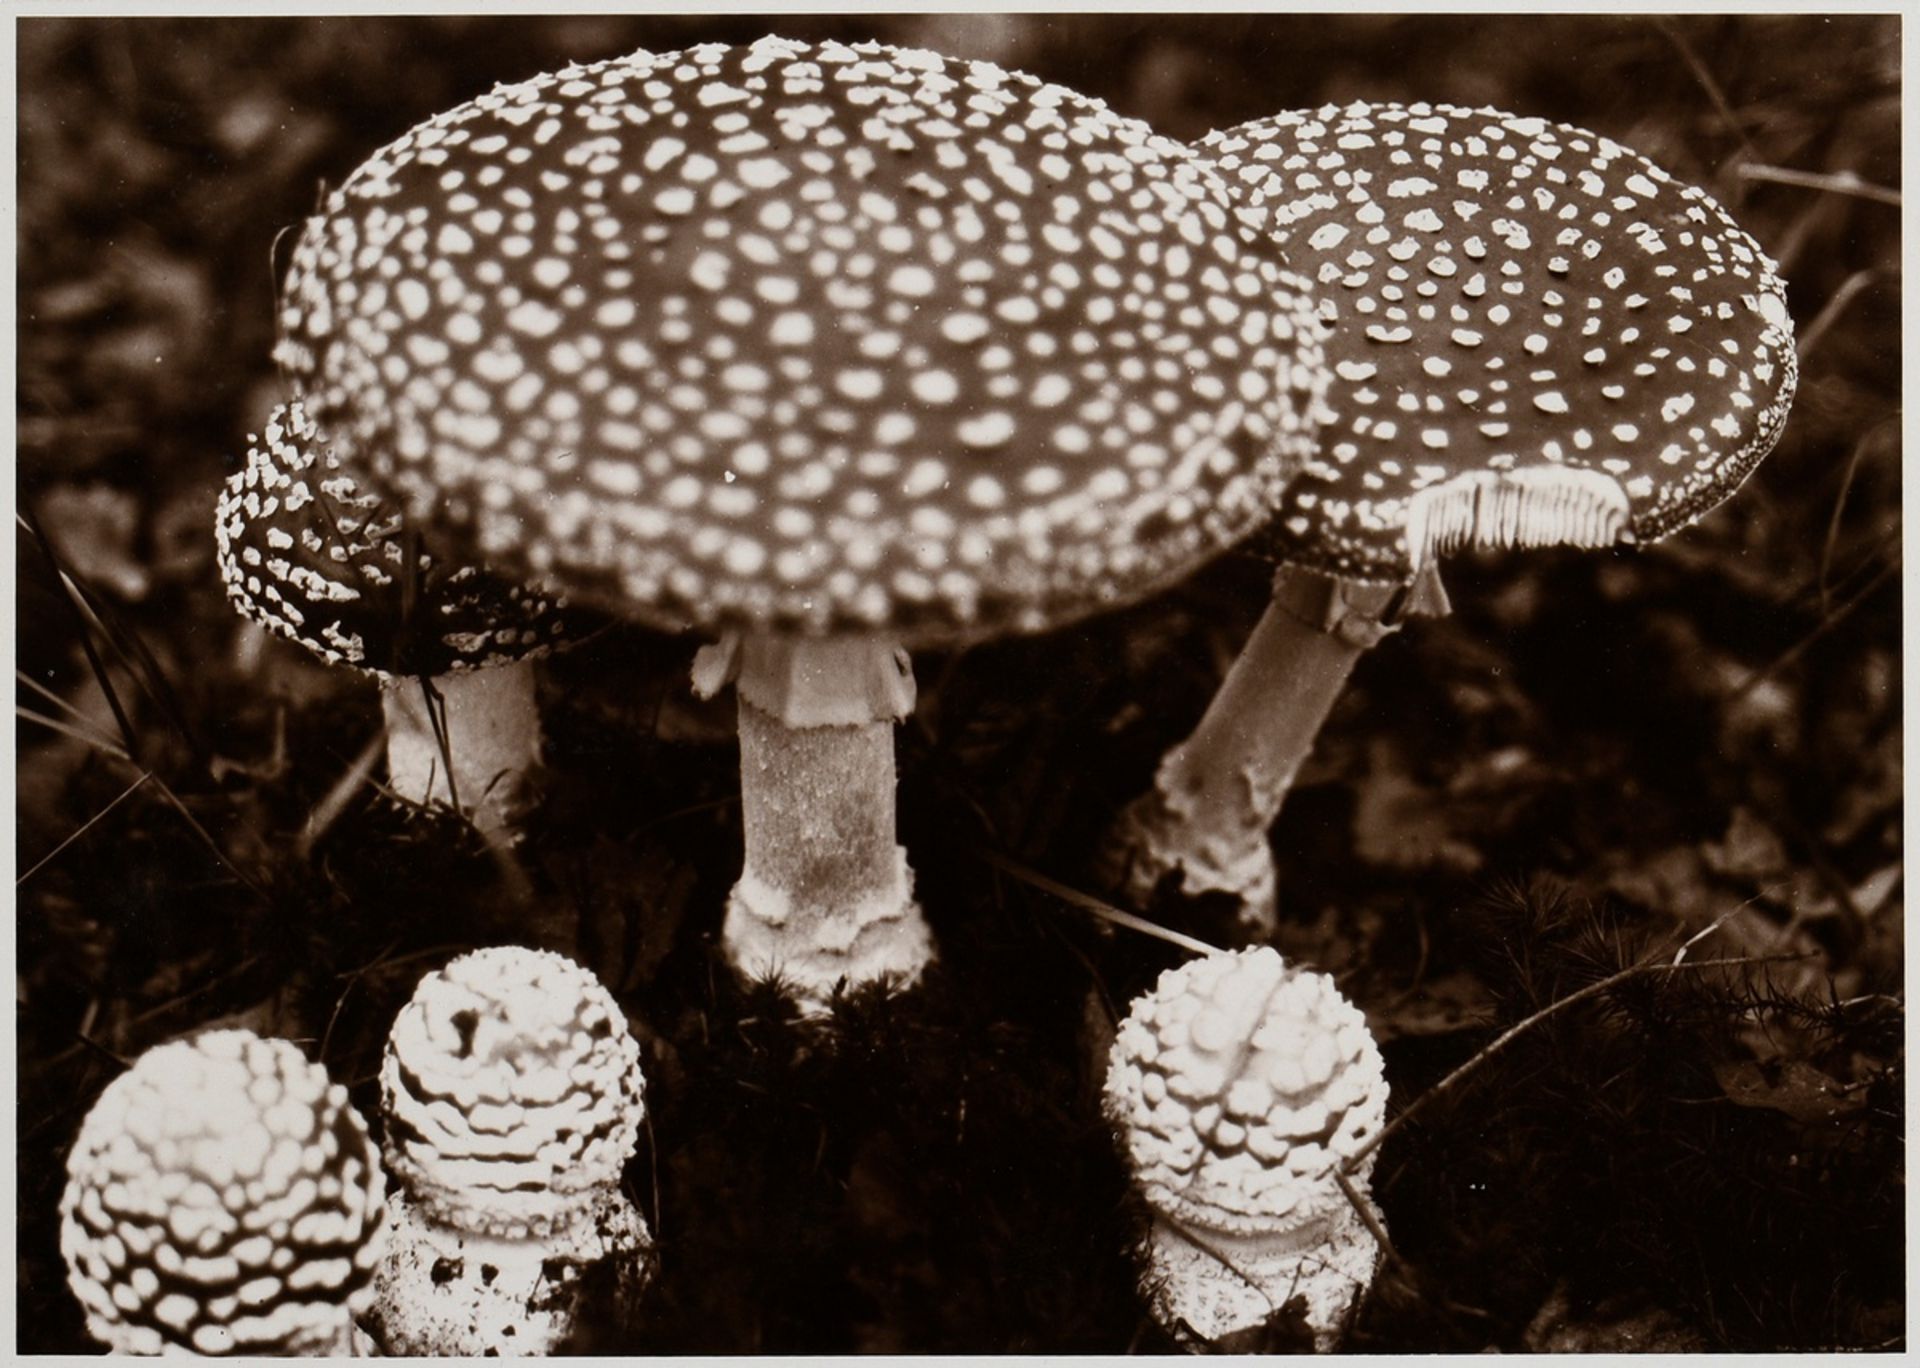 6 Koch, Fred (1904-1947) "Ice Crystals, Mushrooms, Animals", photographs mounted on cardboard, insc - Image 17 of 20